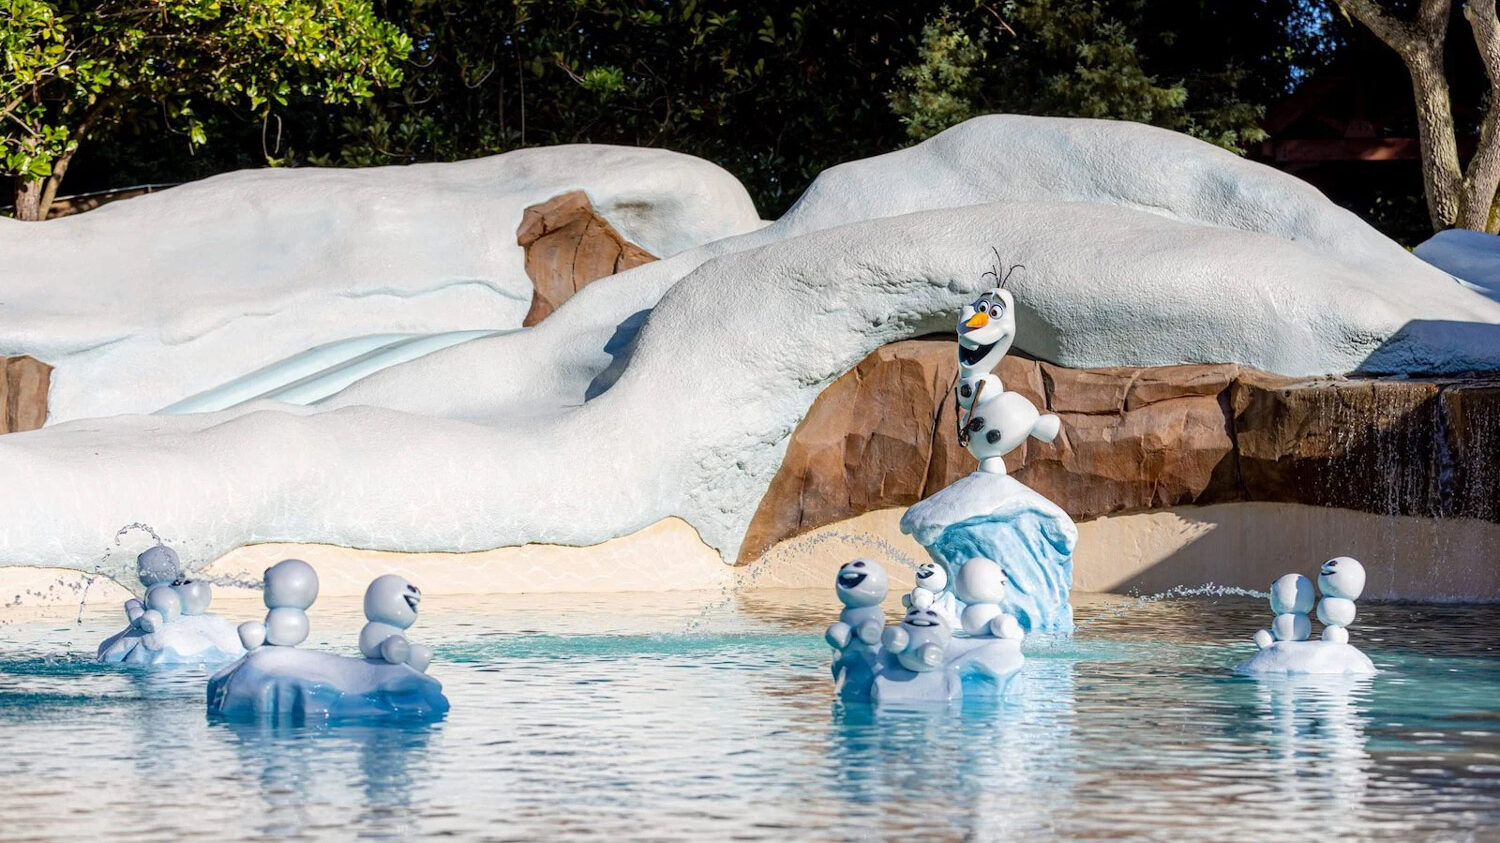 Snowgies and Olaf at Blizzard Beach